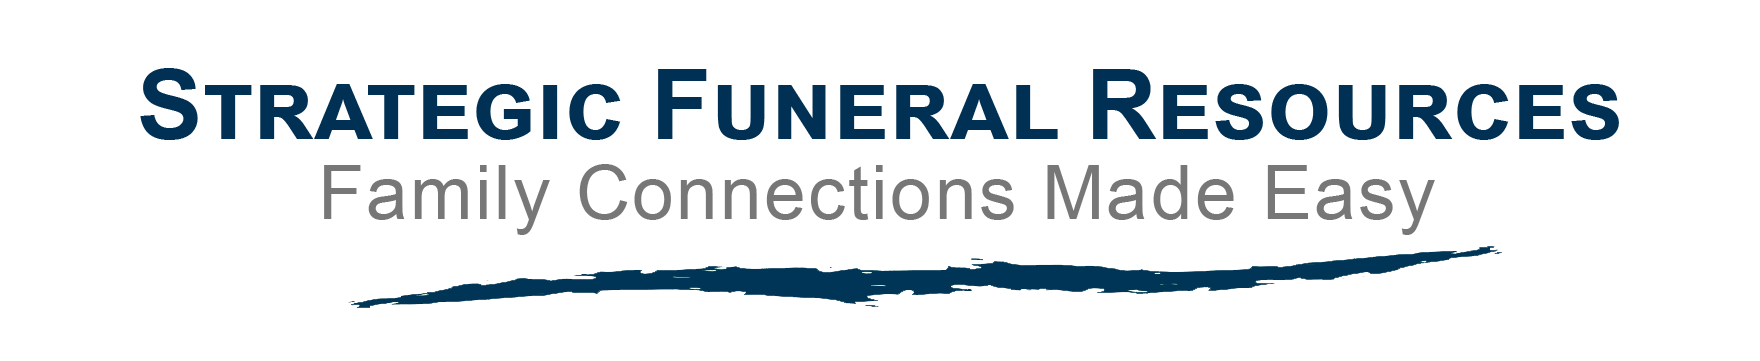 Strategic Funeral Resources